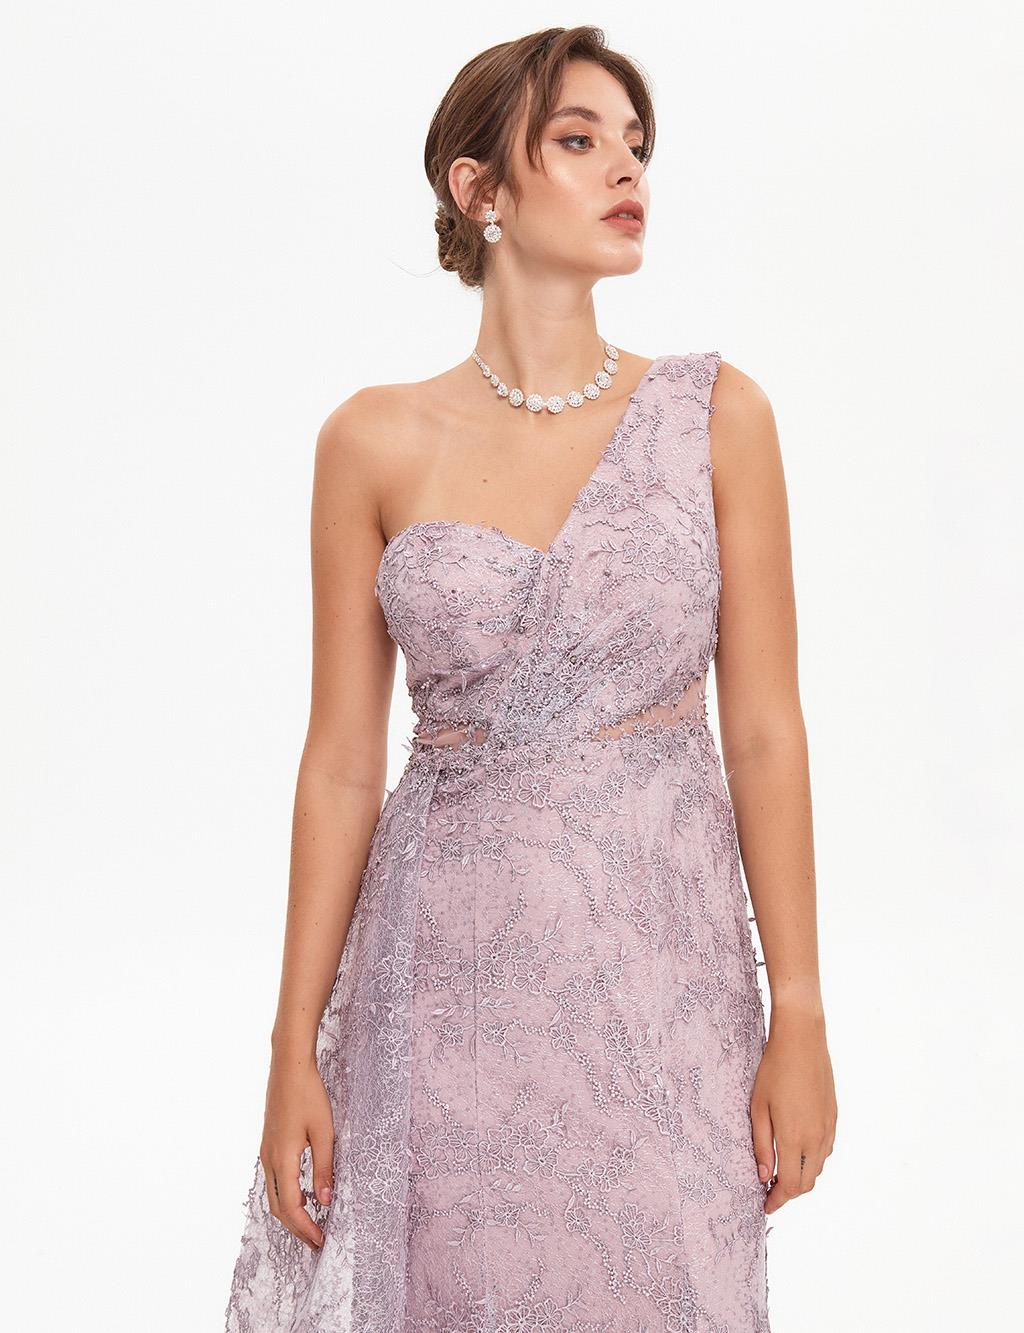 TIARA One Shoulder Dress With Cape Lilac